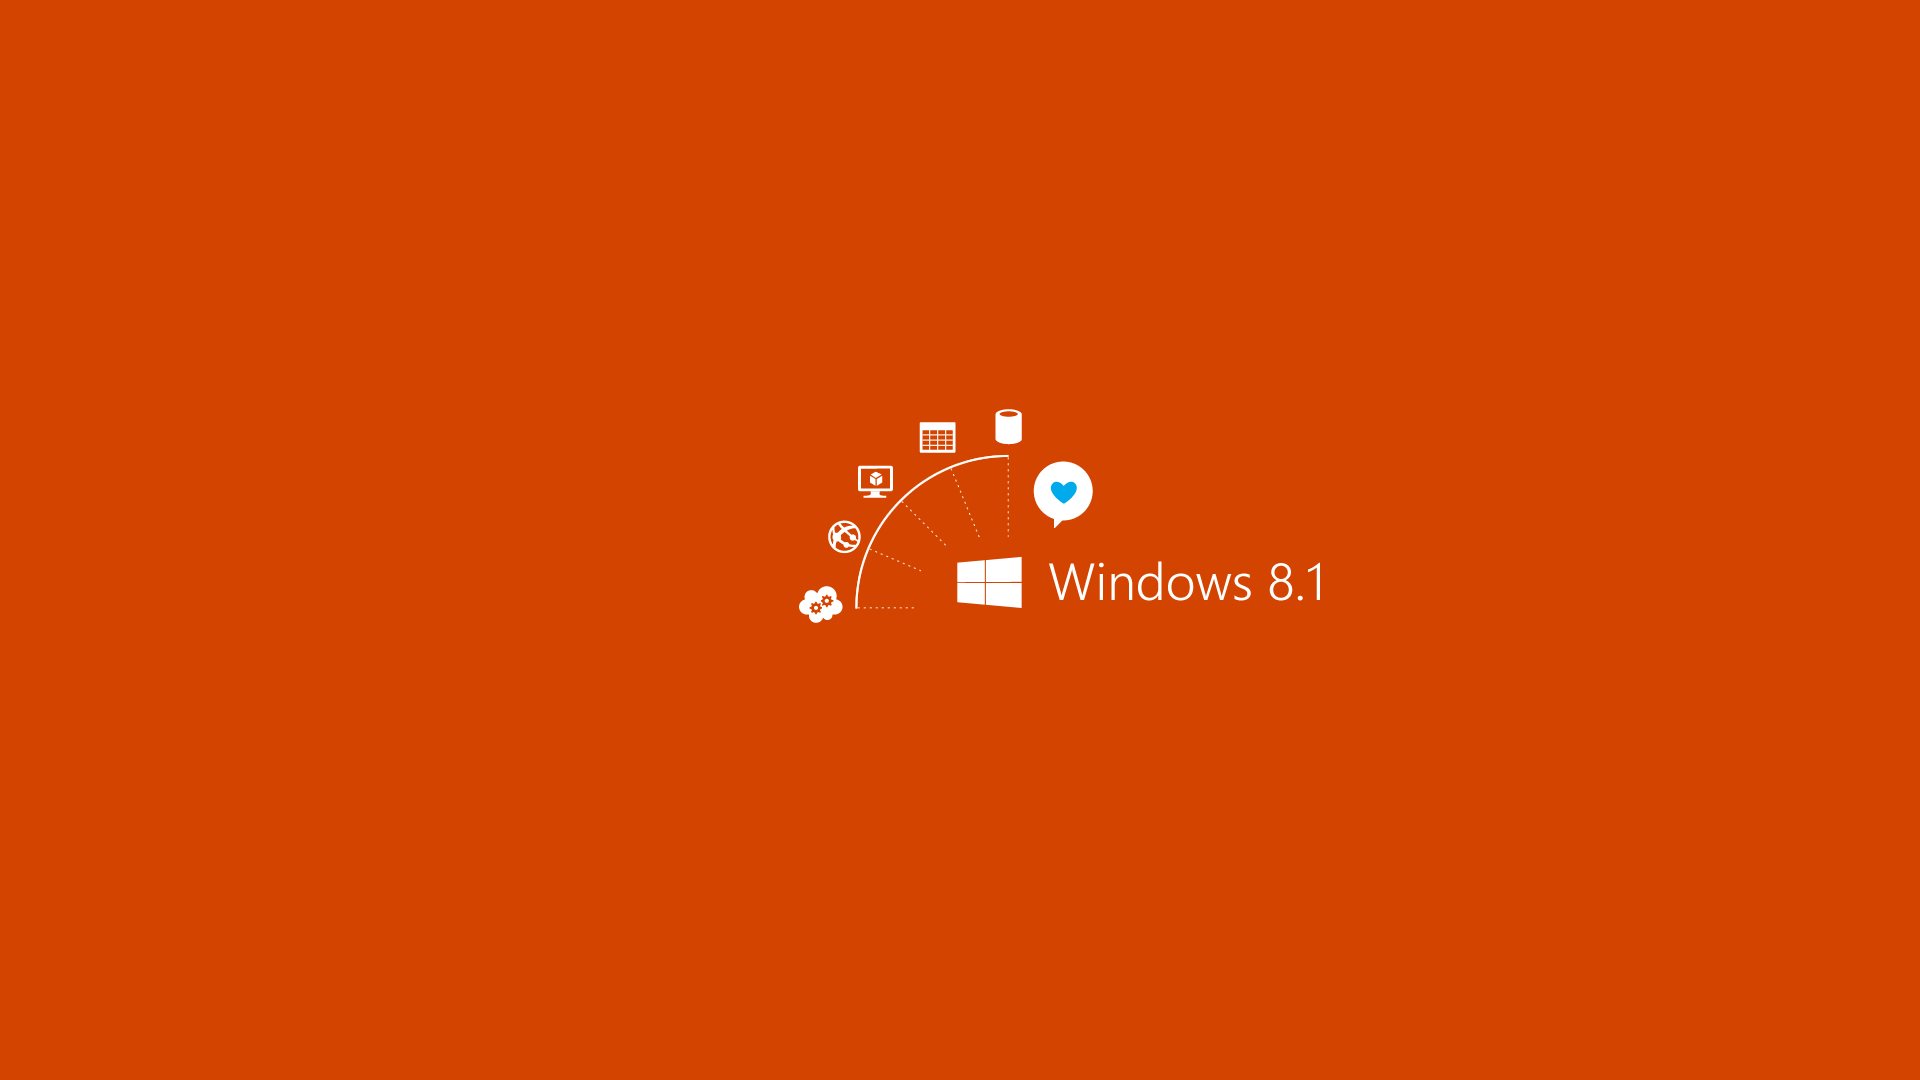 5 Windows 8.1 HD Wallpapers | Backgrounds - Wallpaper Abyss